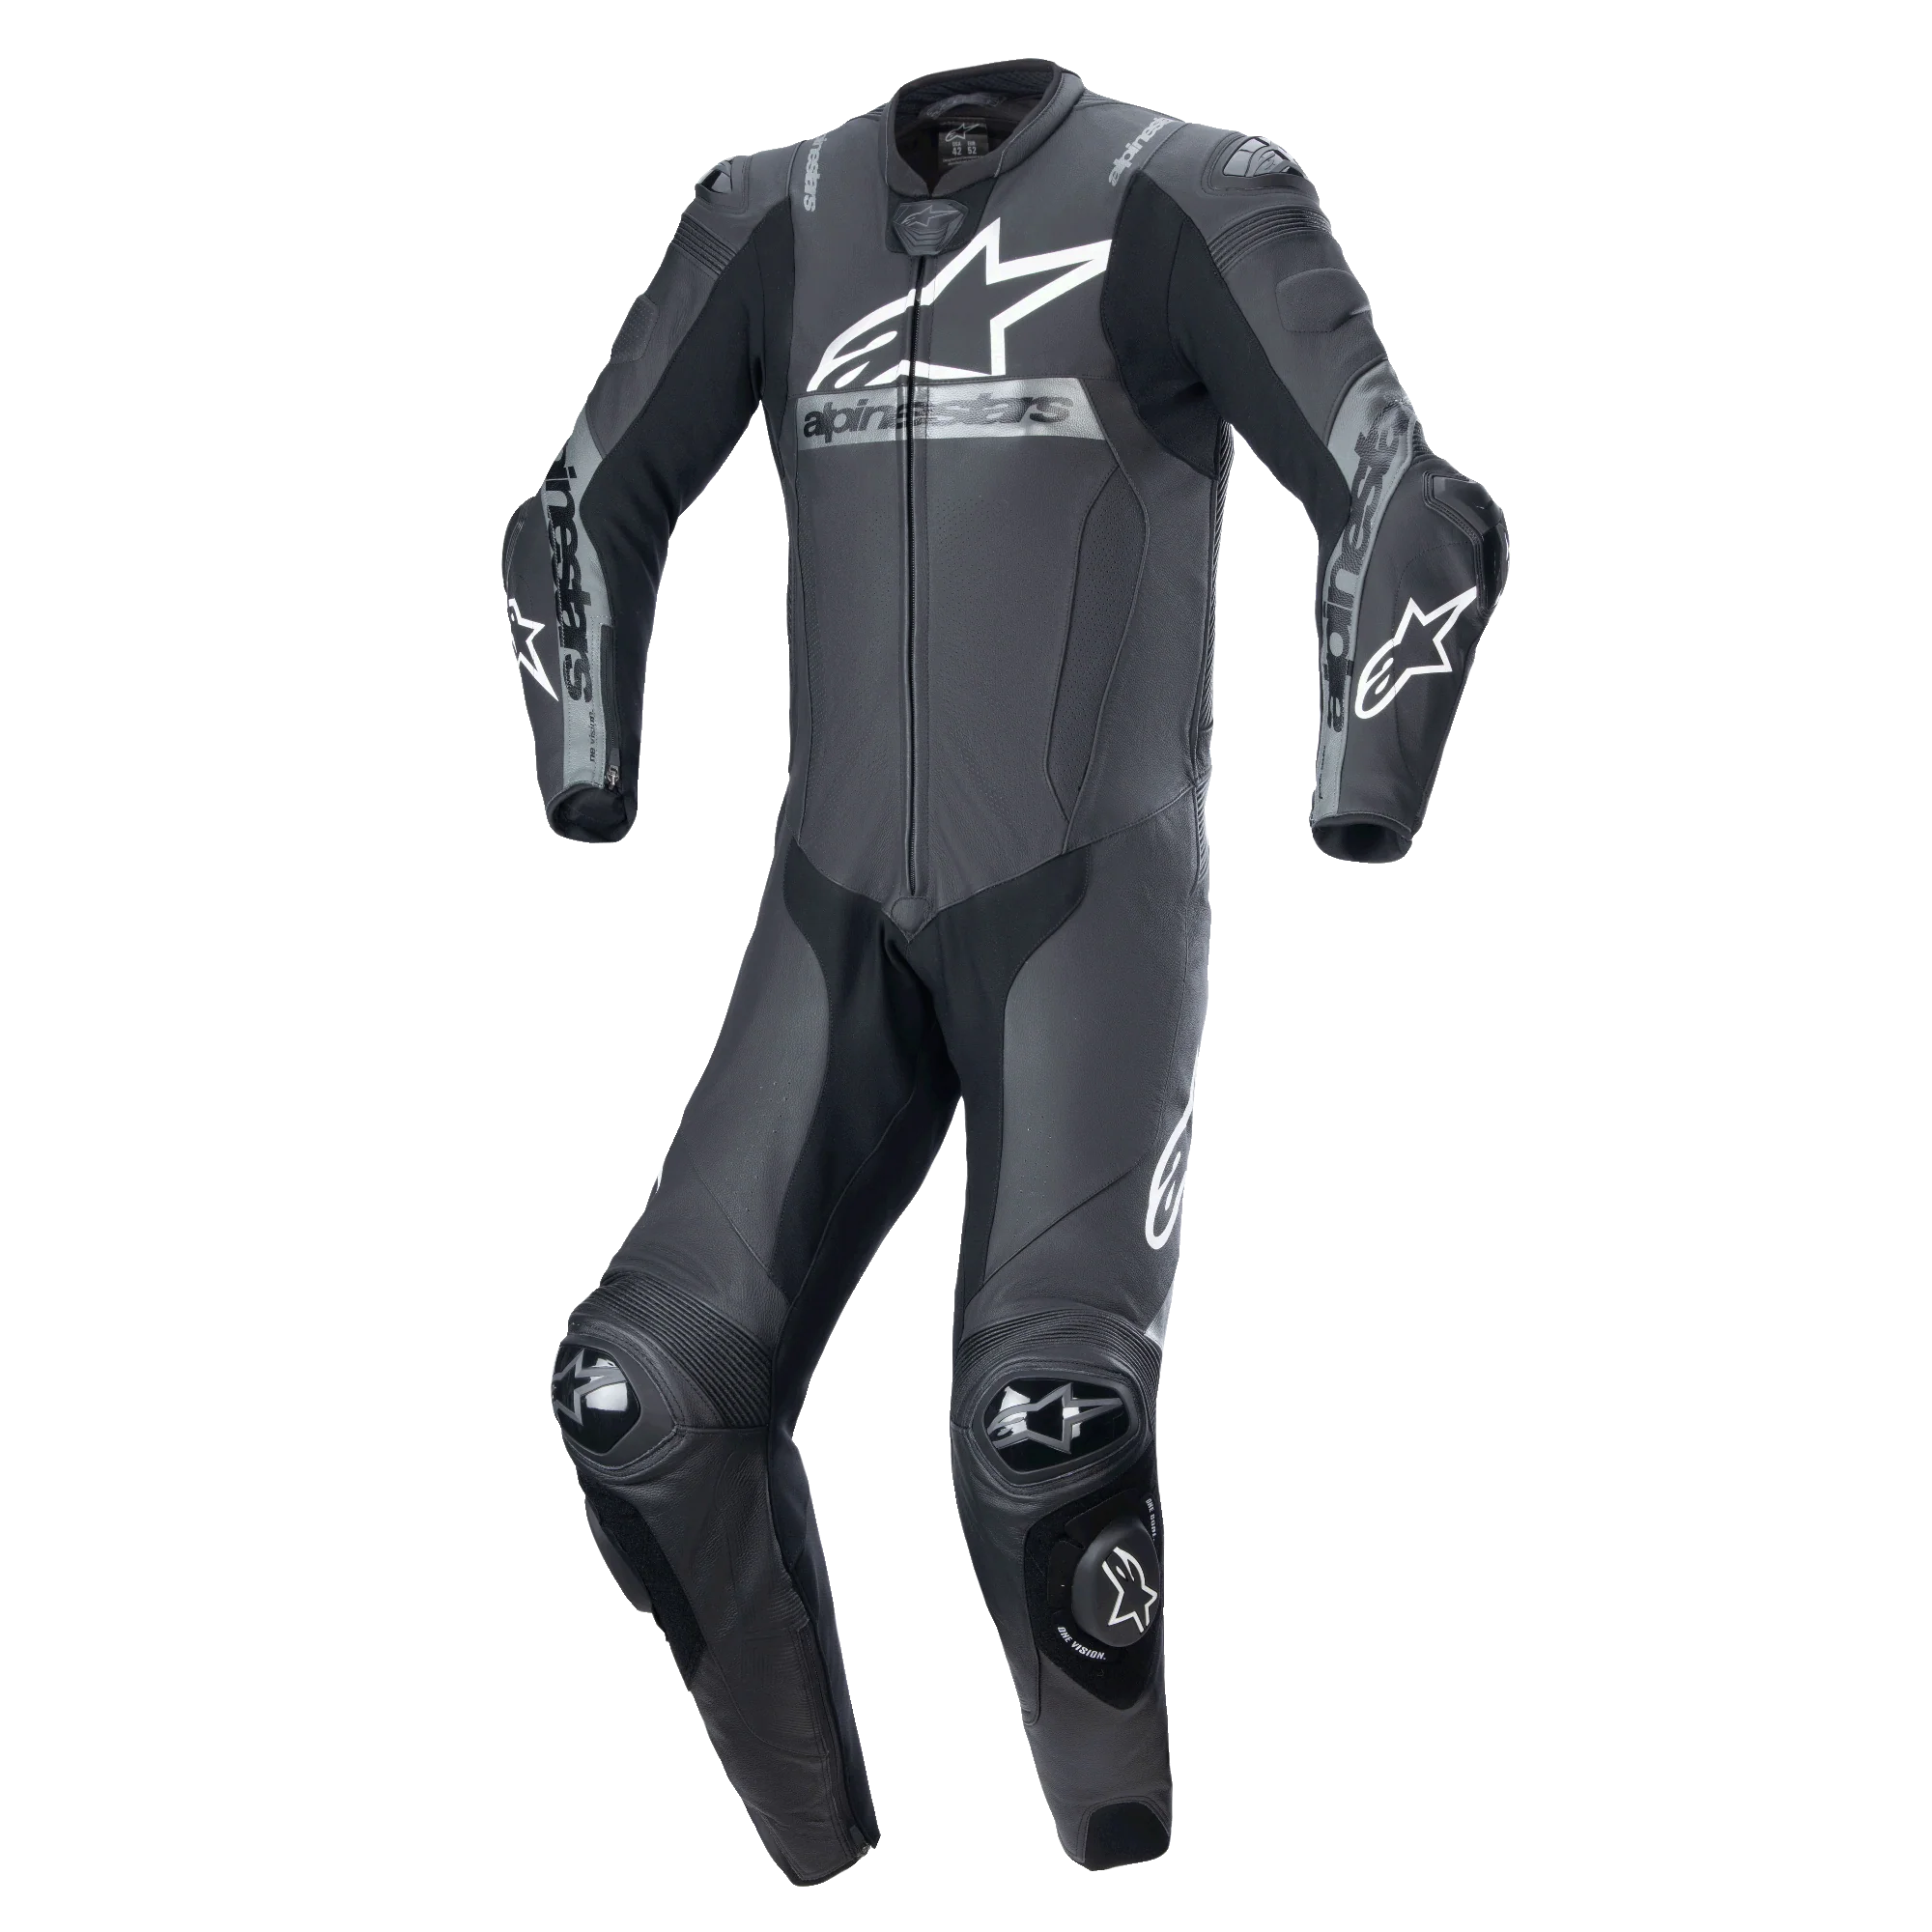 Motorbike Racing Leather Suit MN-0147